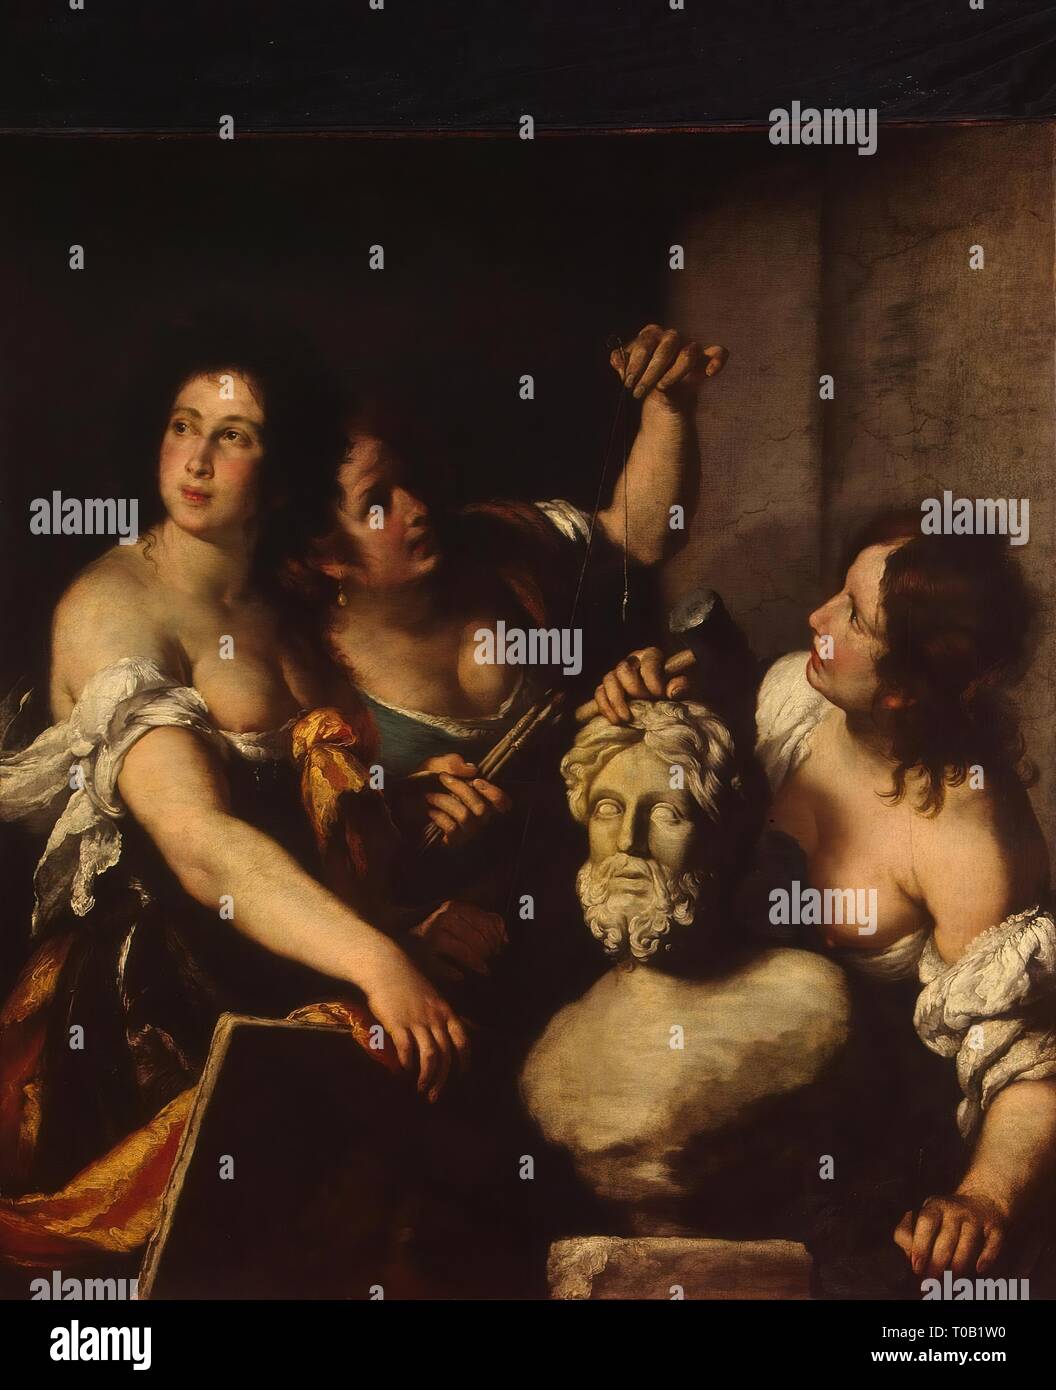 'Allegory of the Arts'. Italy, Between 1635 and 1640. Dimensions: 152x140 cm. Museum: State Hermitage, St. Petersburg. Author: Strozzi, Bernardo (Il Cappuccino, Il Prete Genovese). Bernardo Strozzi. Stock Photo